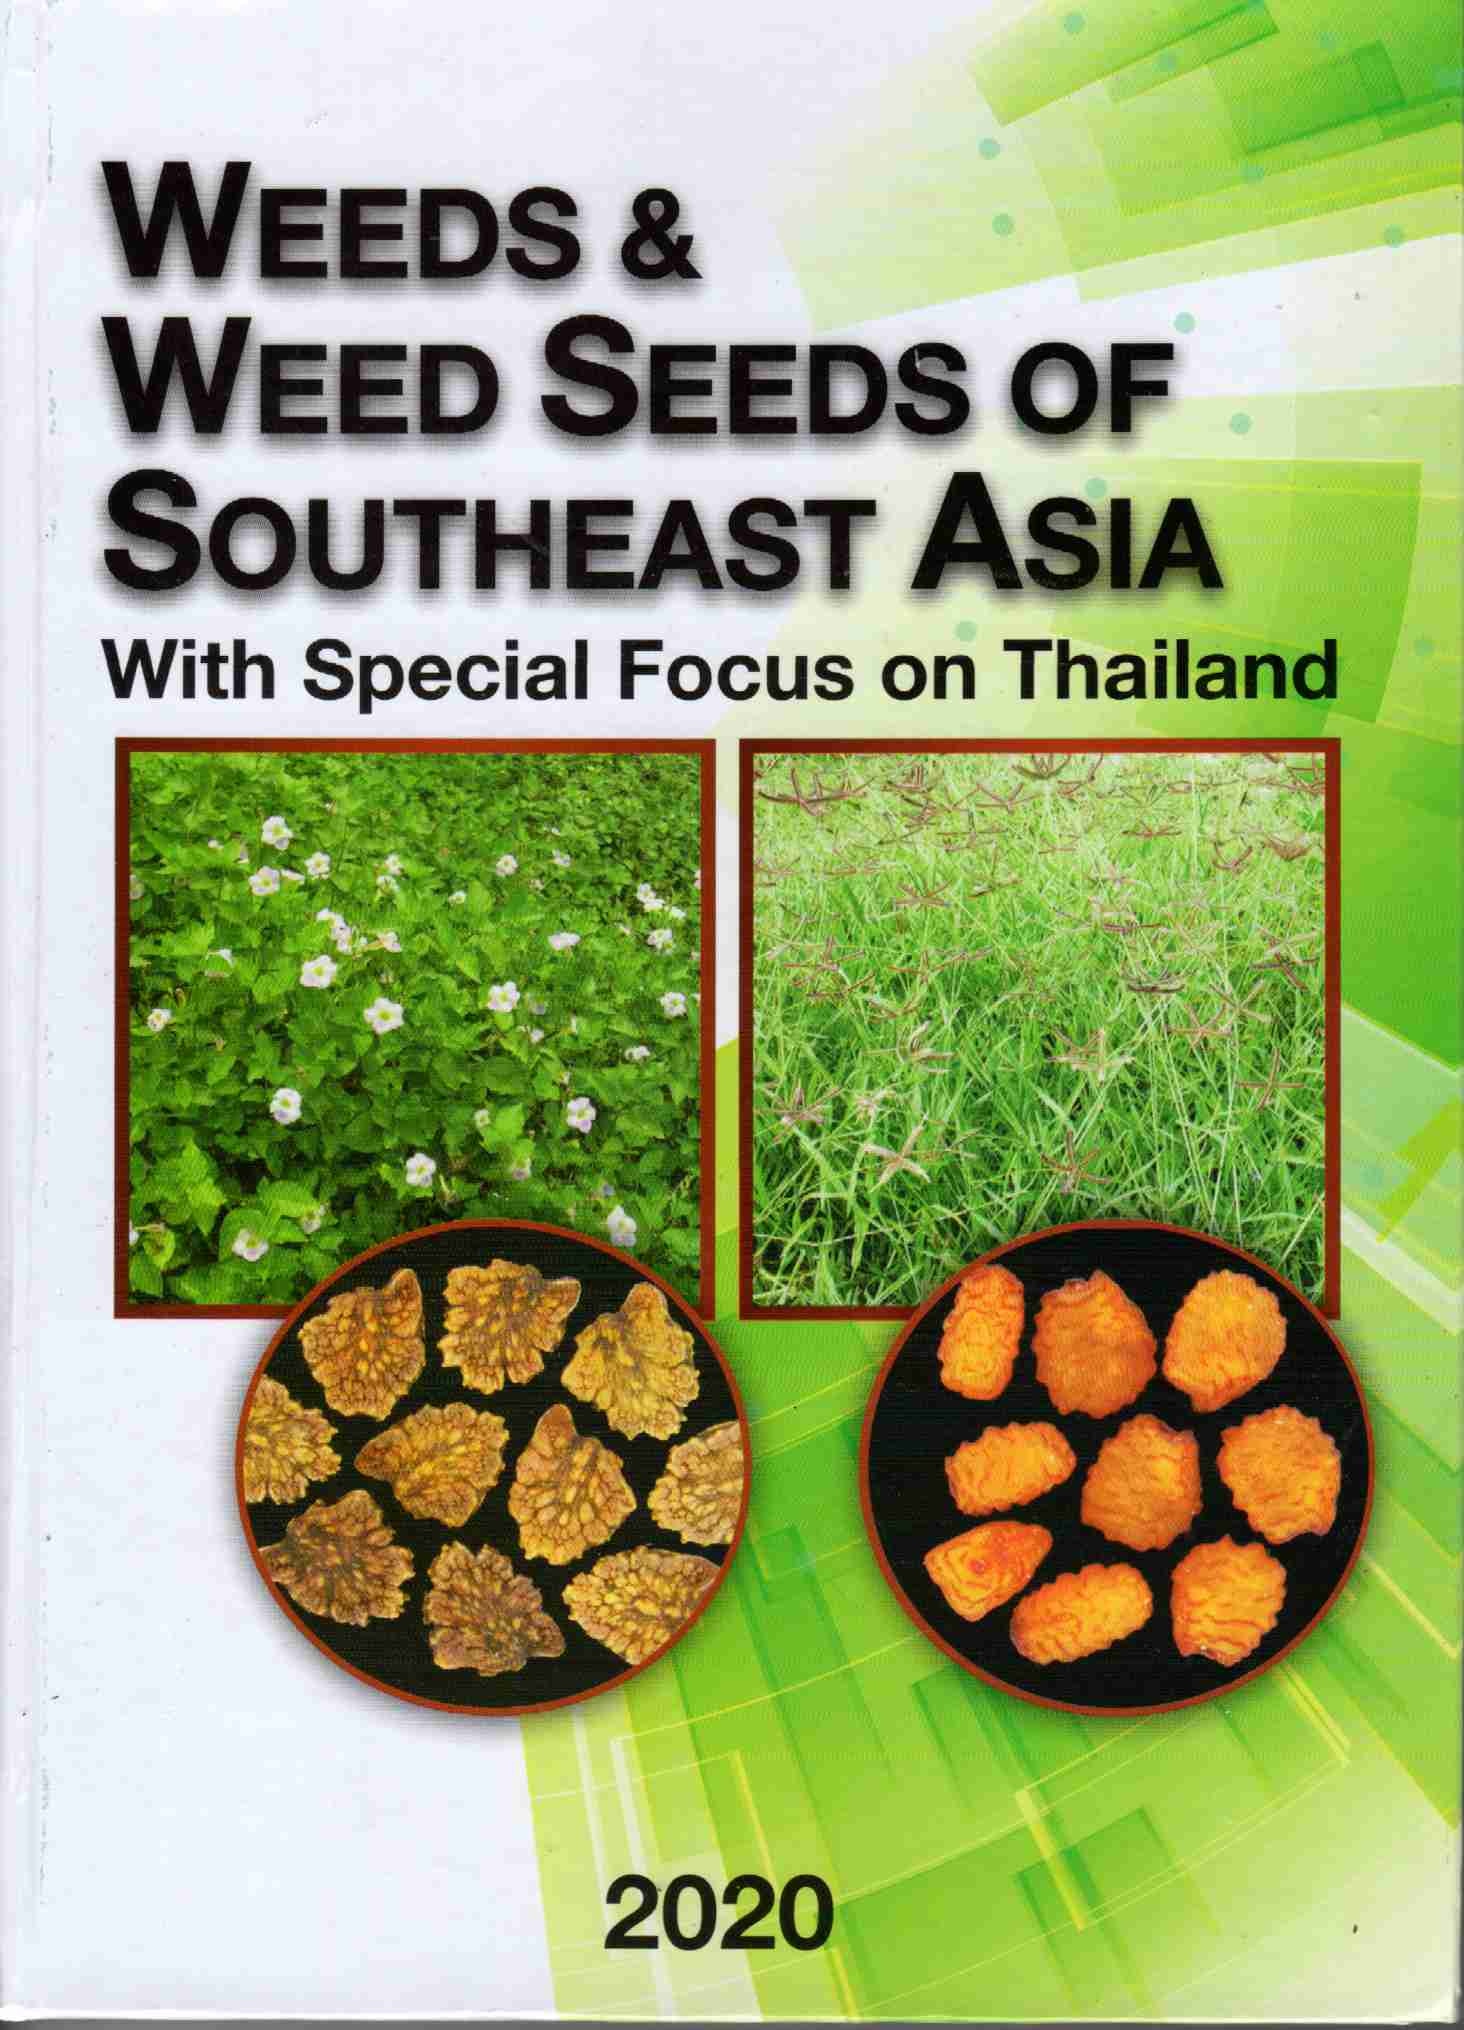 Weeds & Weed Seeds of Southeast Asia: With Special Focus on Thailand